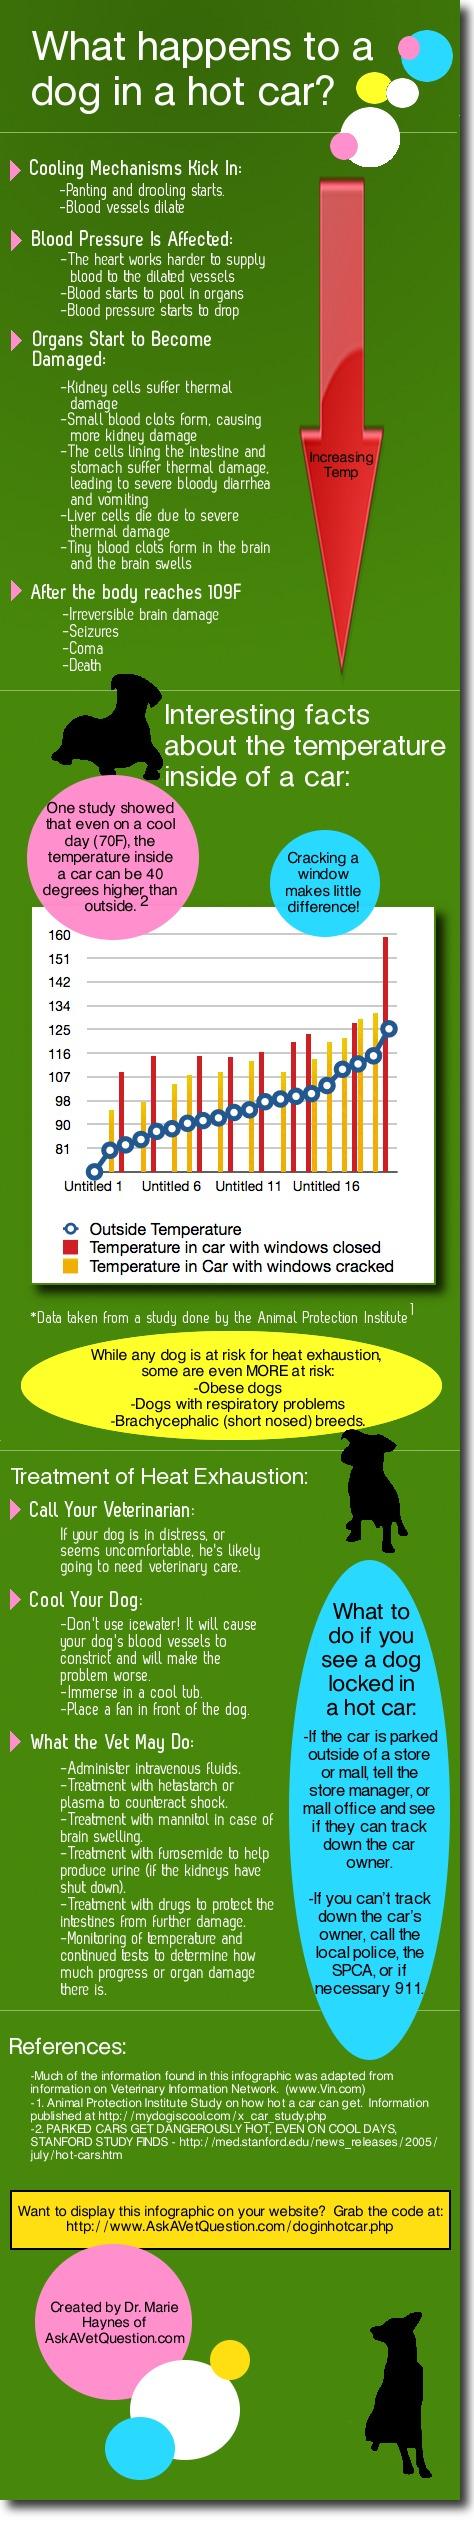 infographic about the effects of leaving a dog in a hot car